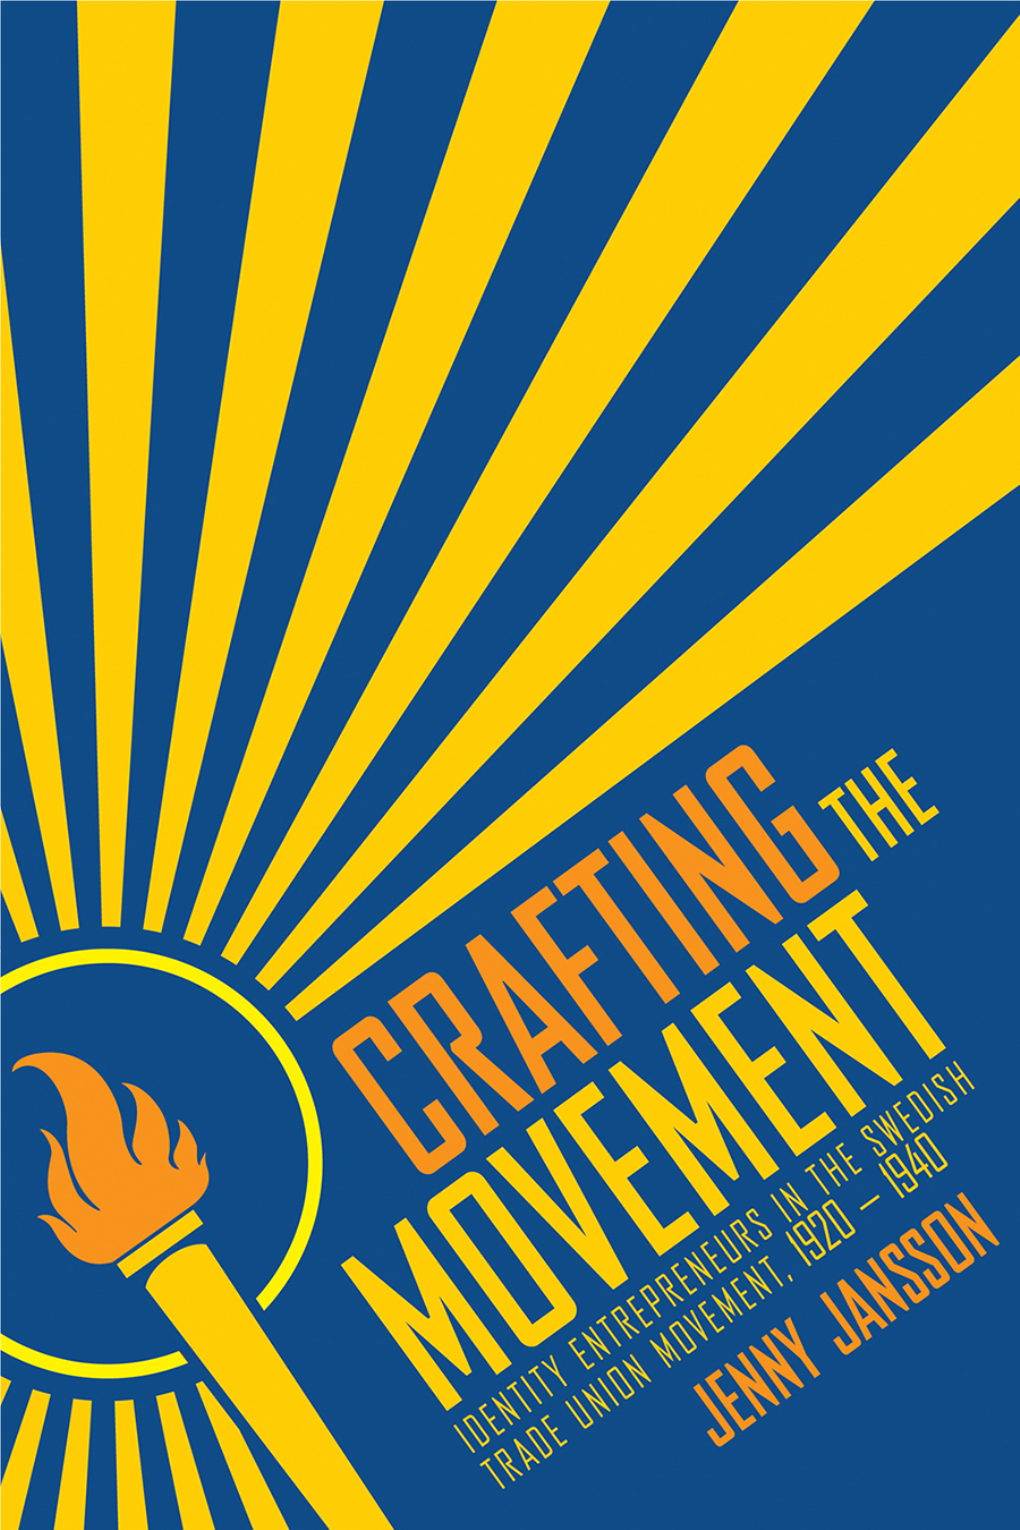 CRAFTING the MOVEMENT: Identity